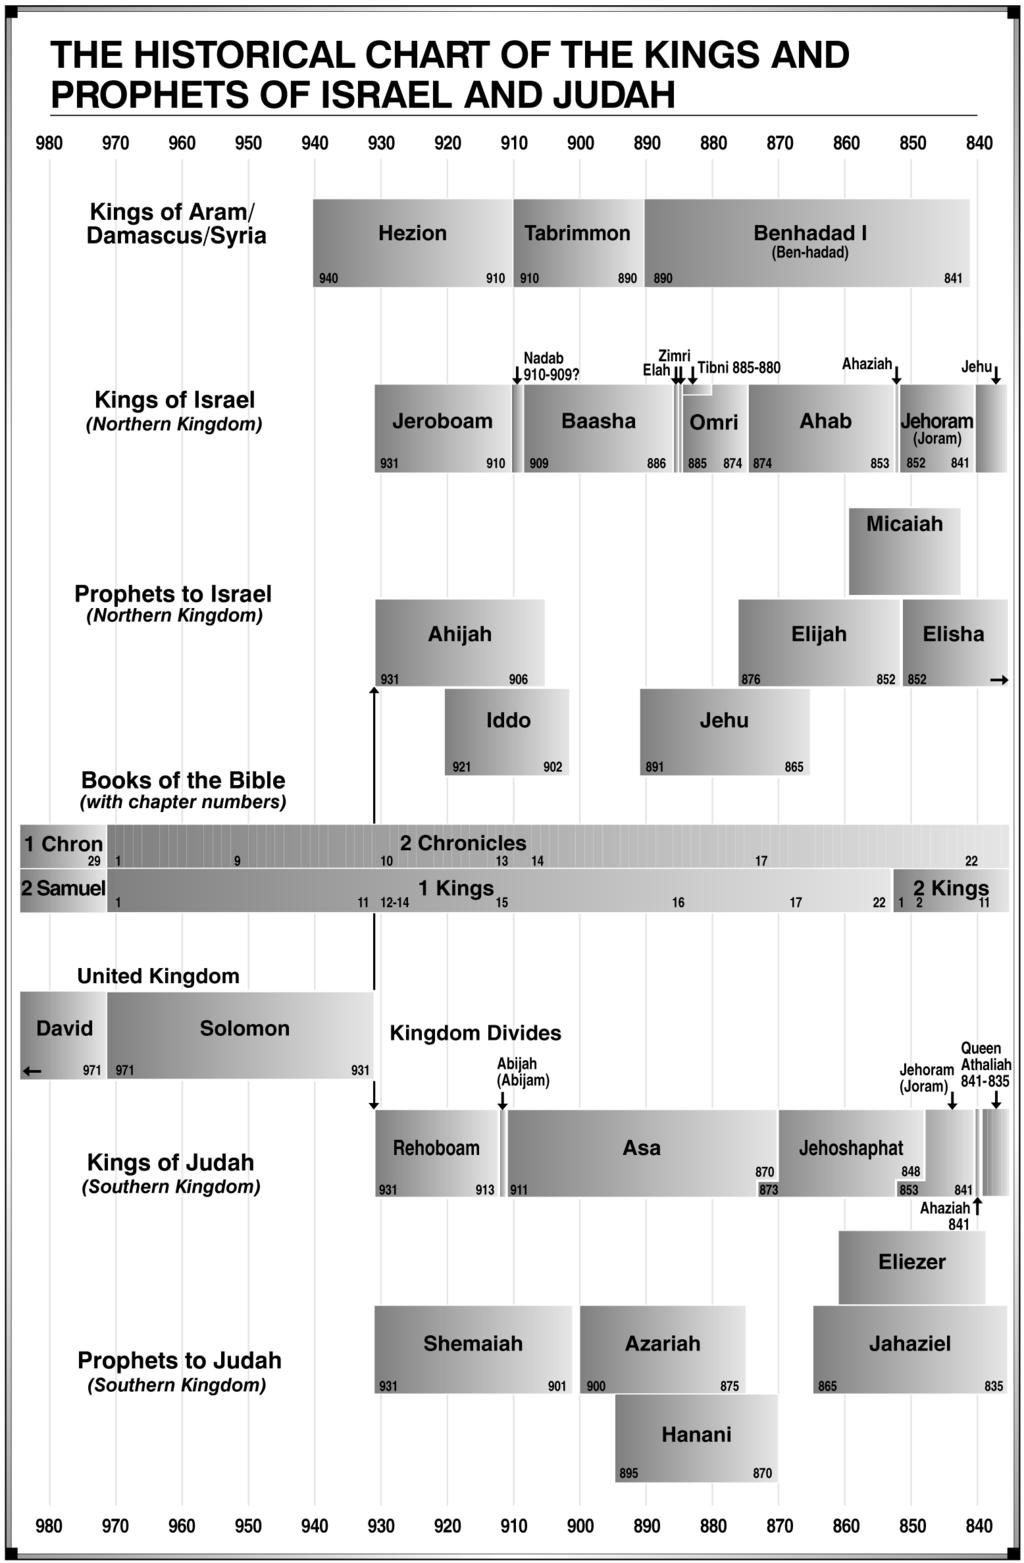 The Historical Chart of the Kings